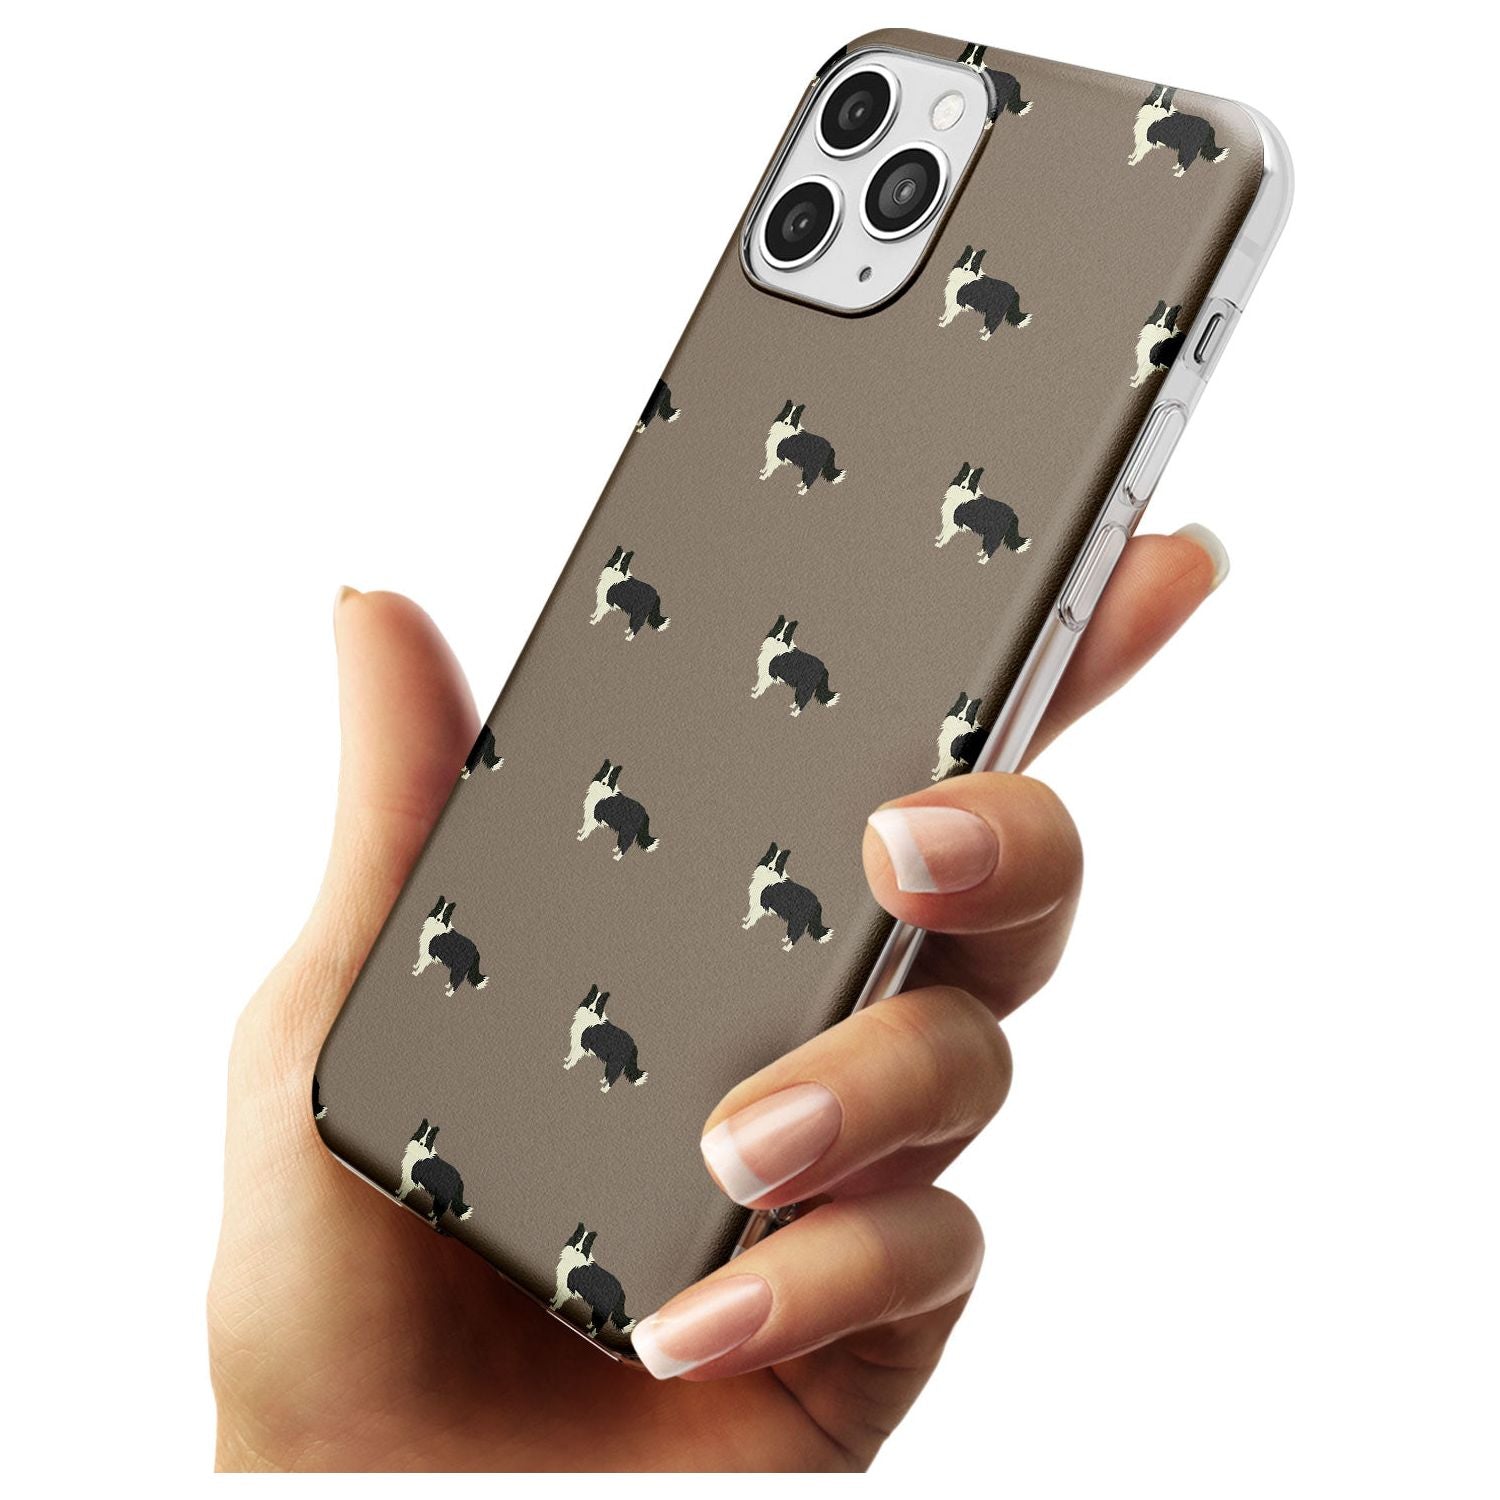 Border Collie Dog Pattern Slim TPU Phone Case for iPhone 11 Pro Max